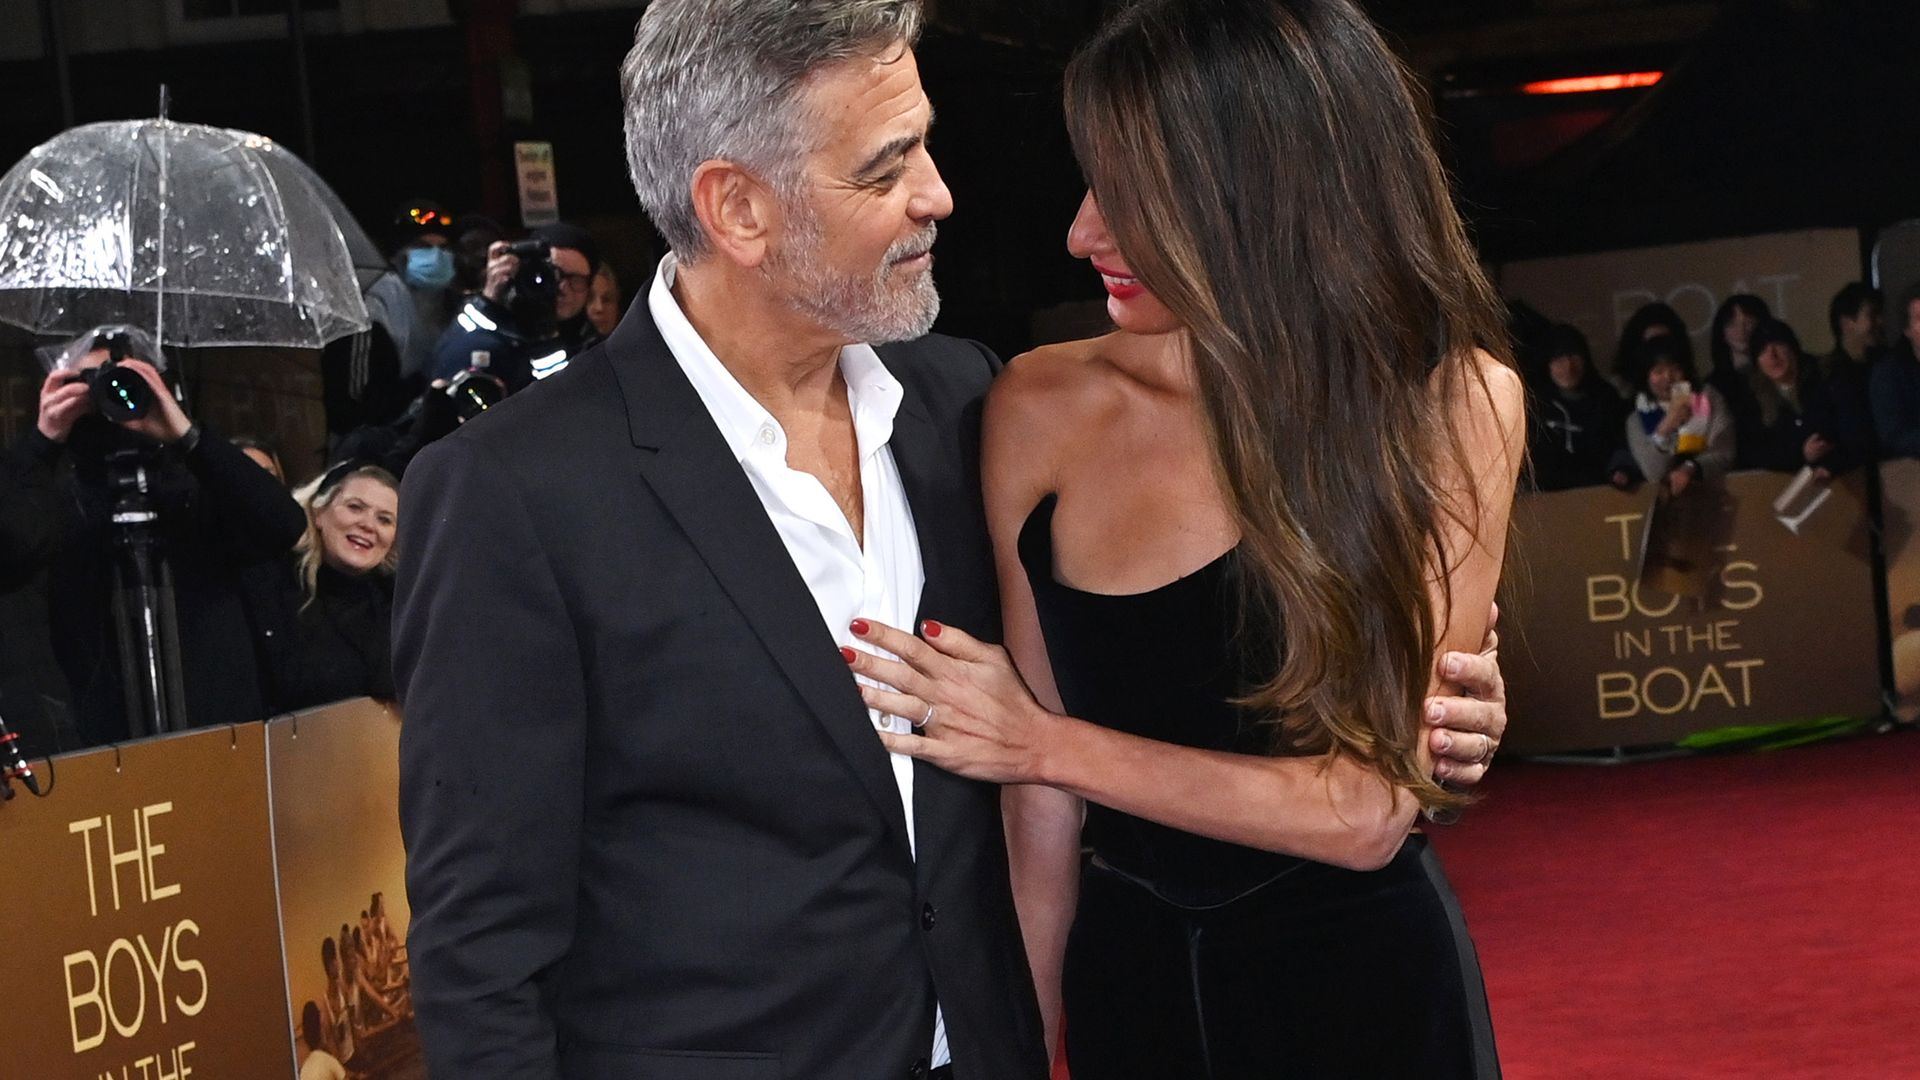 LONDON, ENGLAND - DECEMBER 03: George Clooney and Amal Clooney attend a special screening of "The Boys In The Boat" at The Curzon Mayfair on December 3, 2023 in London, England. (Photo by Dave Benett/WireImage)